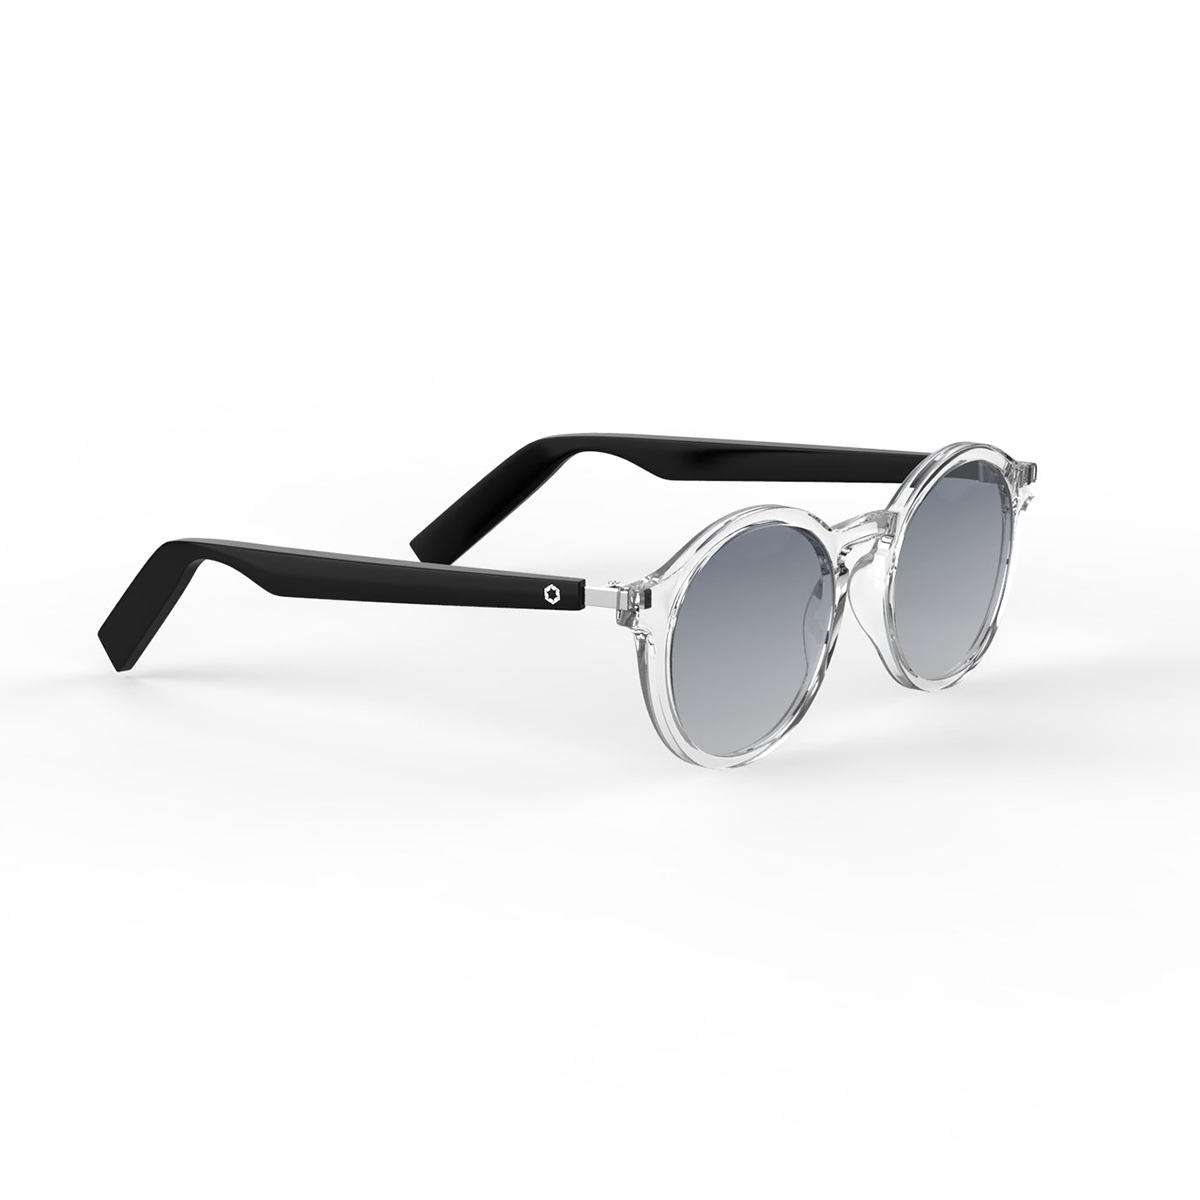 Lucyd Bluetooth Round Sunglasses, , large image number null